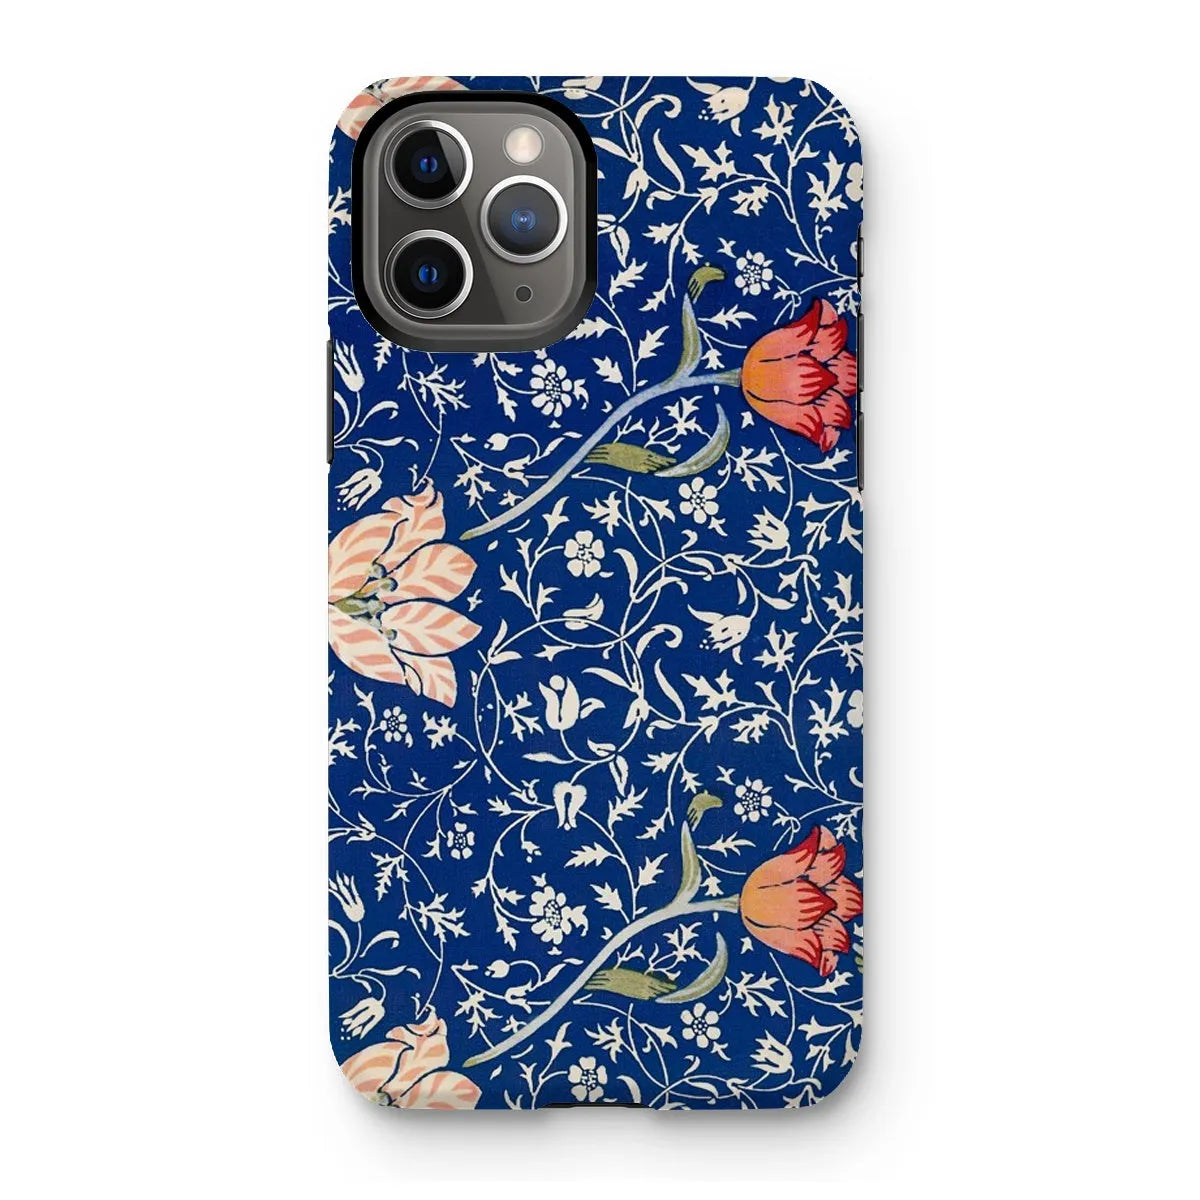 Medway - Floral Aesthetic Art Phone Case - William Morris - Iphone 12 Pro Max / Matte - Mobile Phone Cases - Aesthetic